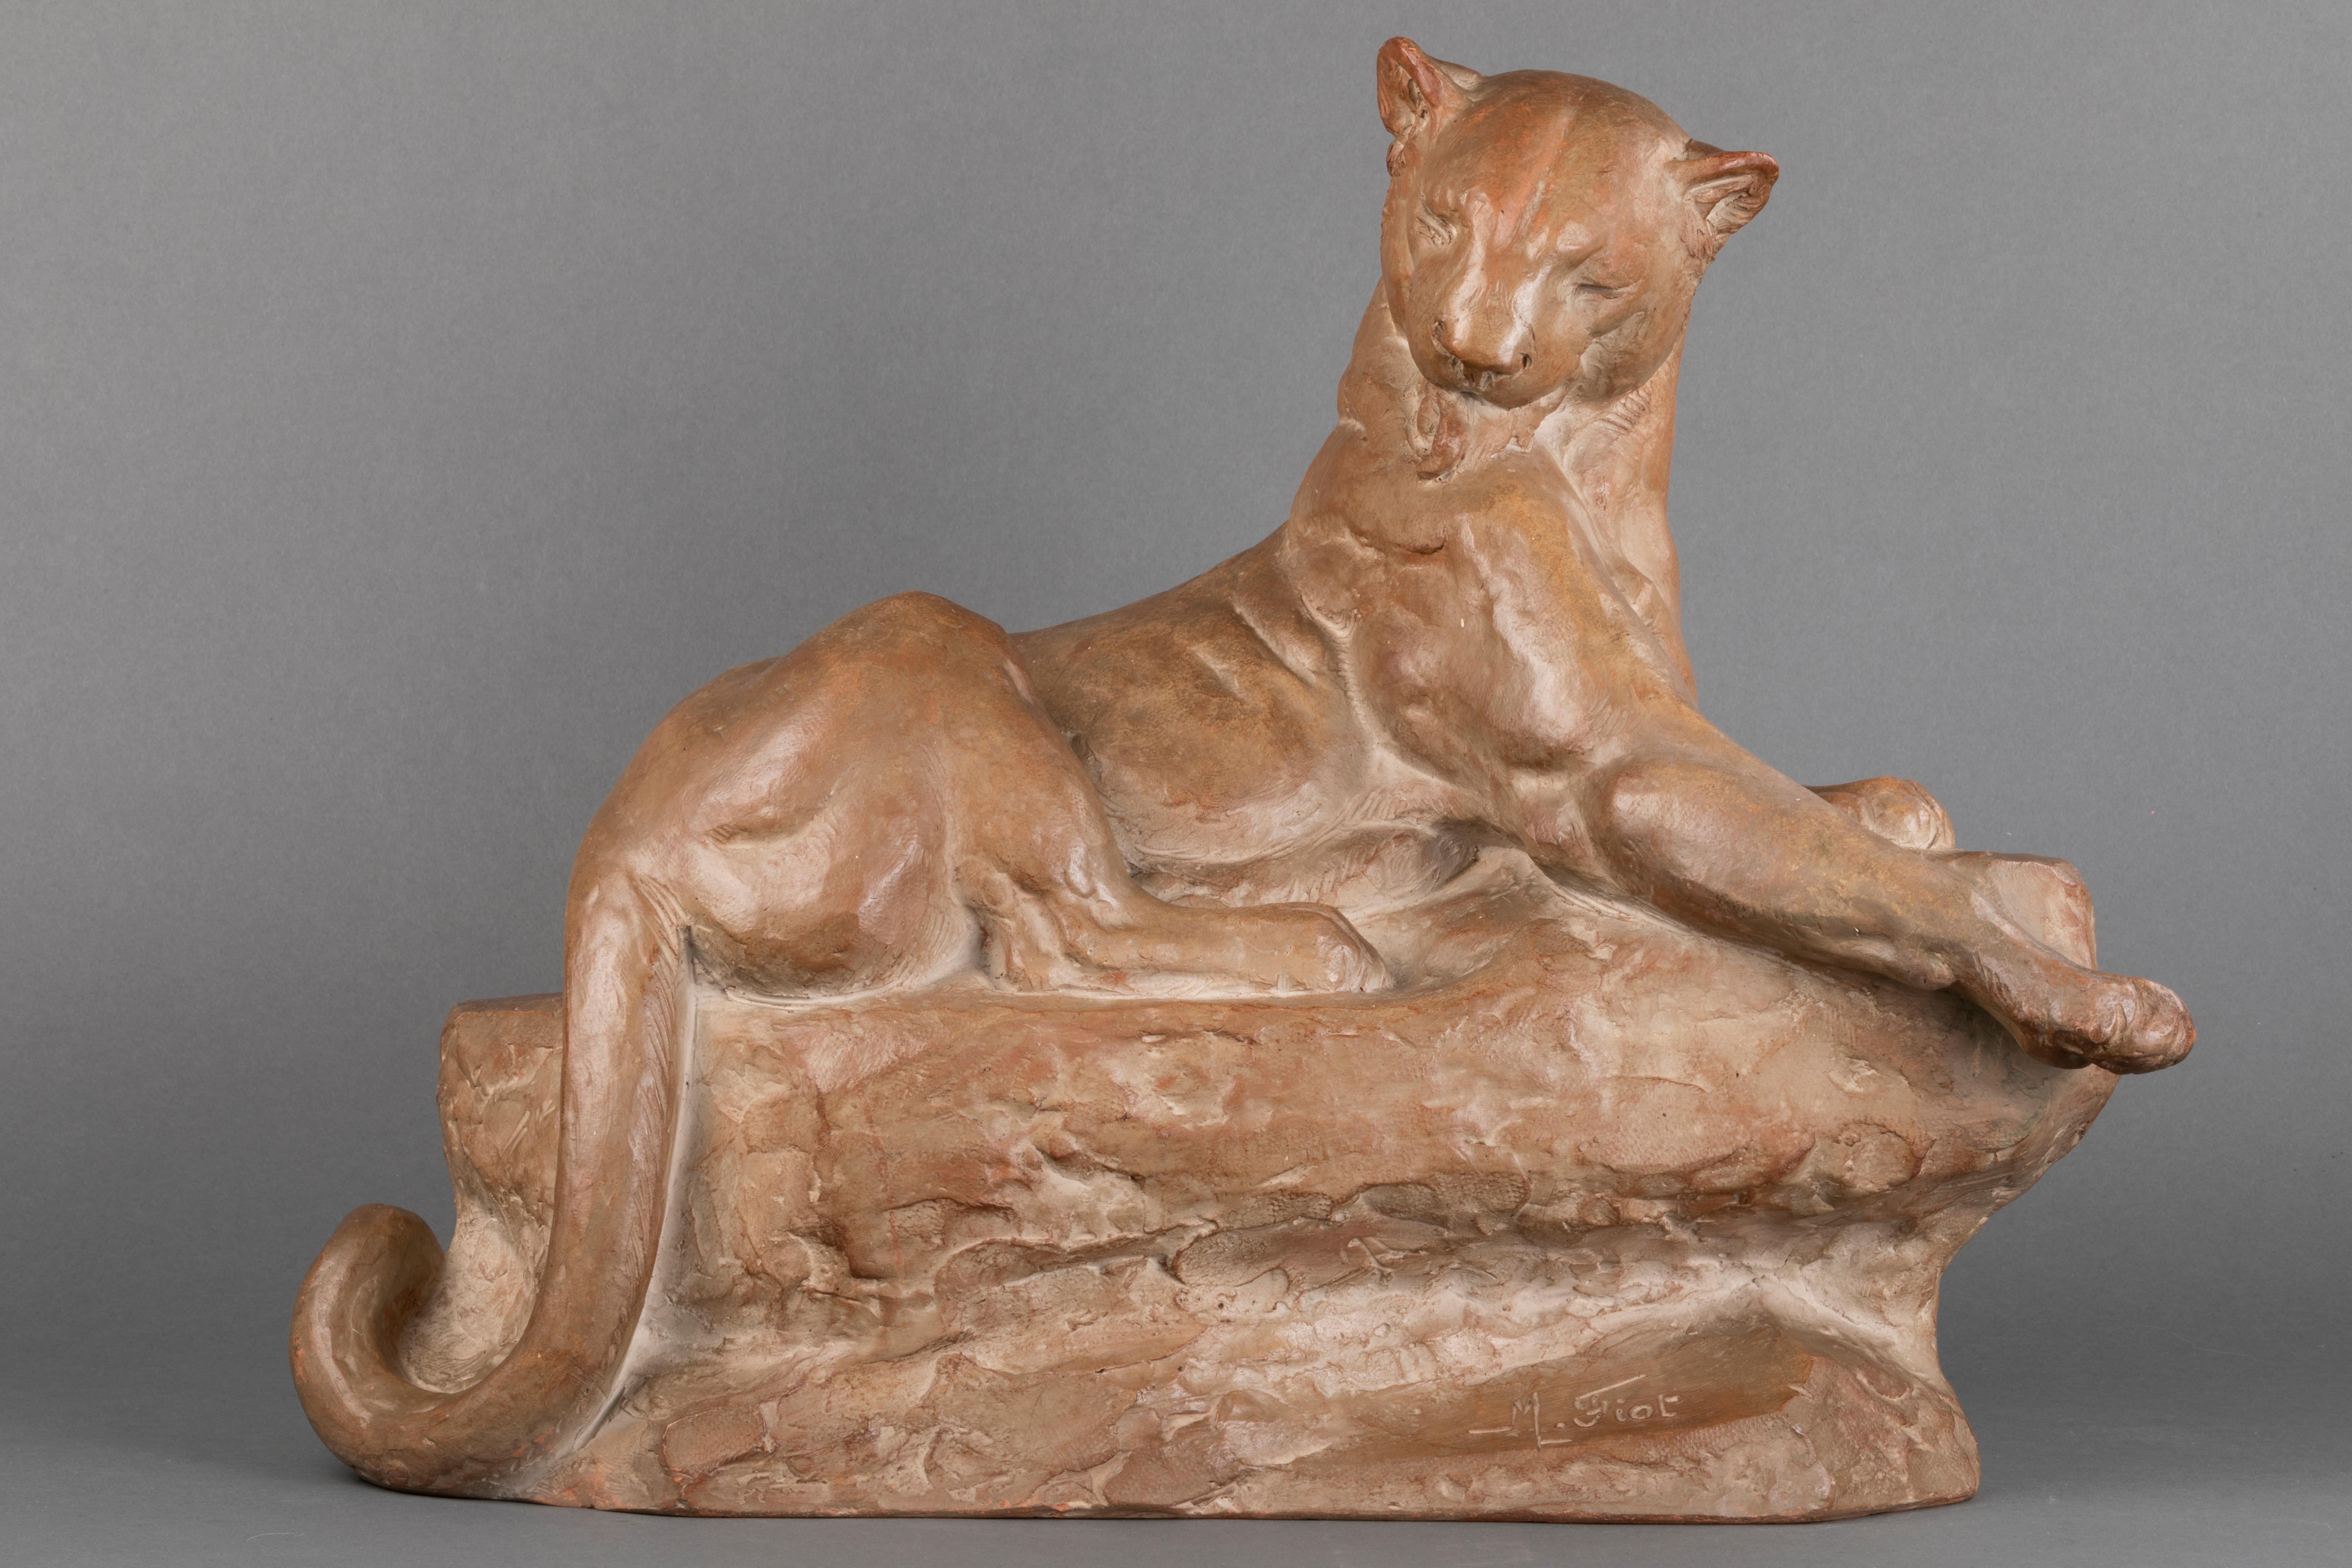 Louis Maximilien FIOT (1886-1953, France) : « Lionne à sa toilette »

Patinated terracota sculpture of a lioness nobly standing on a rock
Old edition by Susse terracota workshop

Signé : « M. FIOT », on the base

Stamp : 